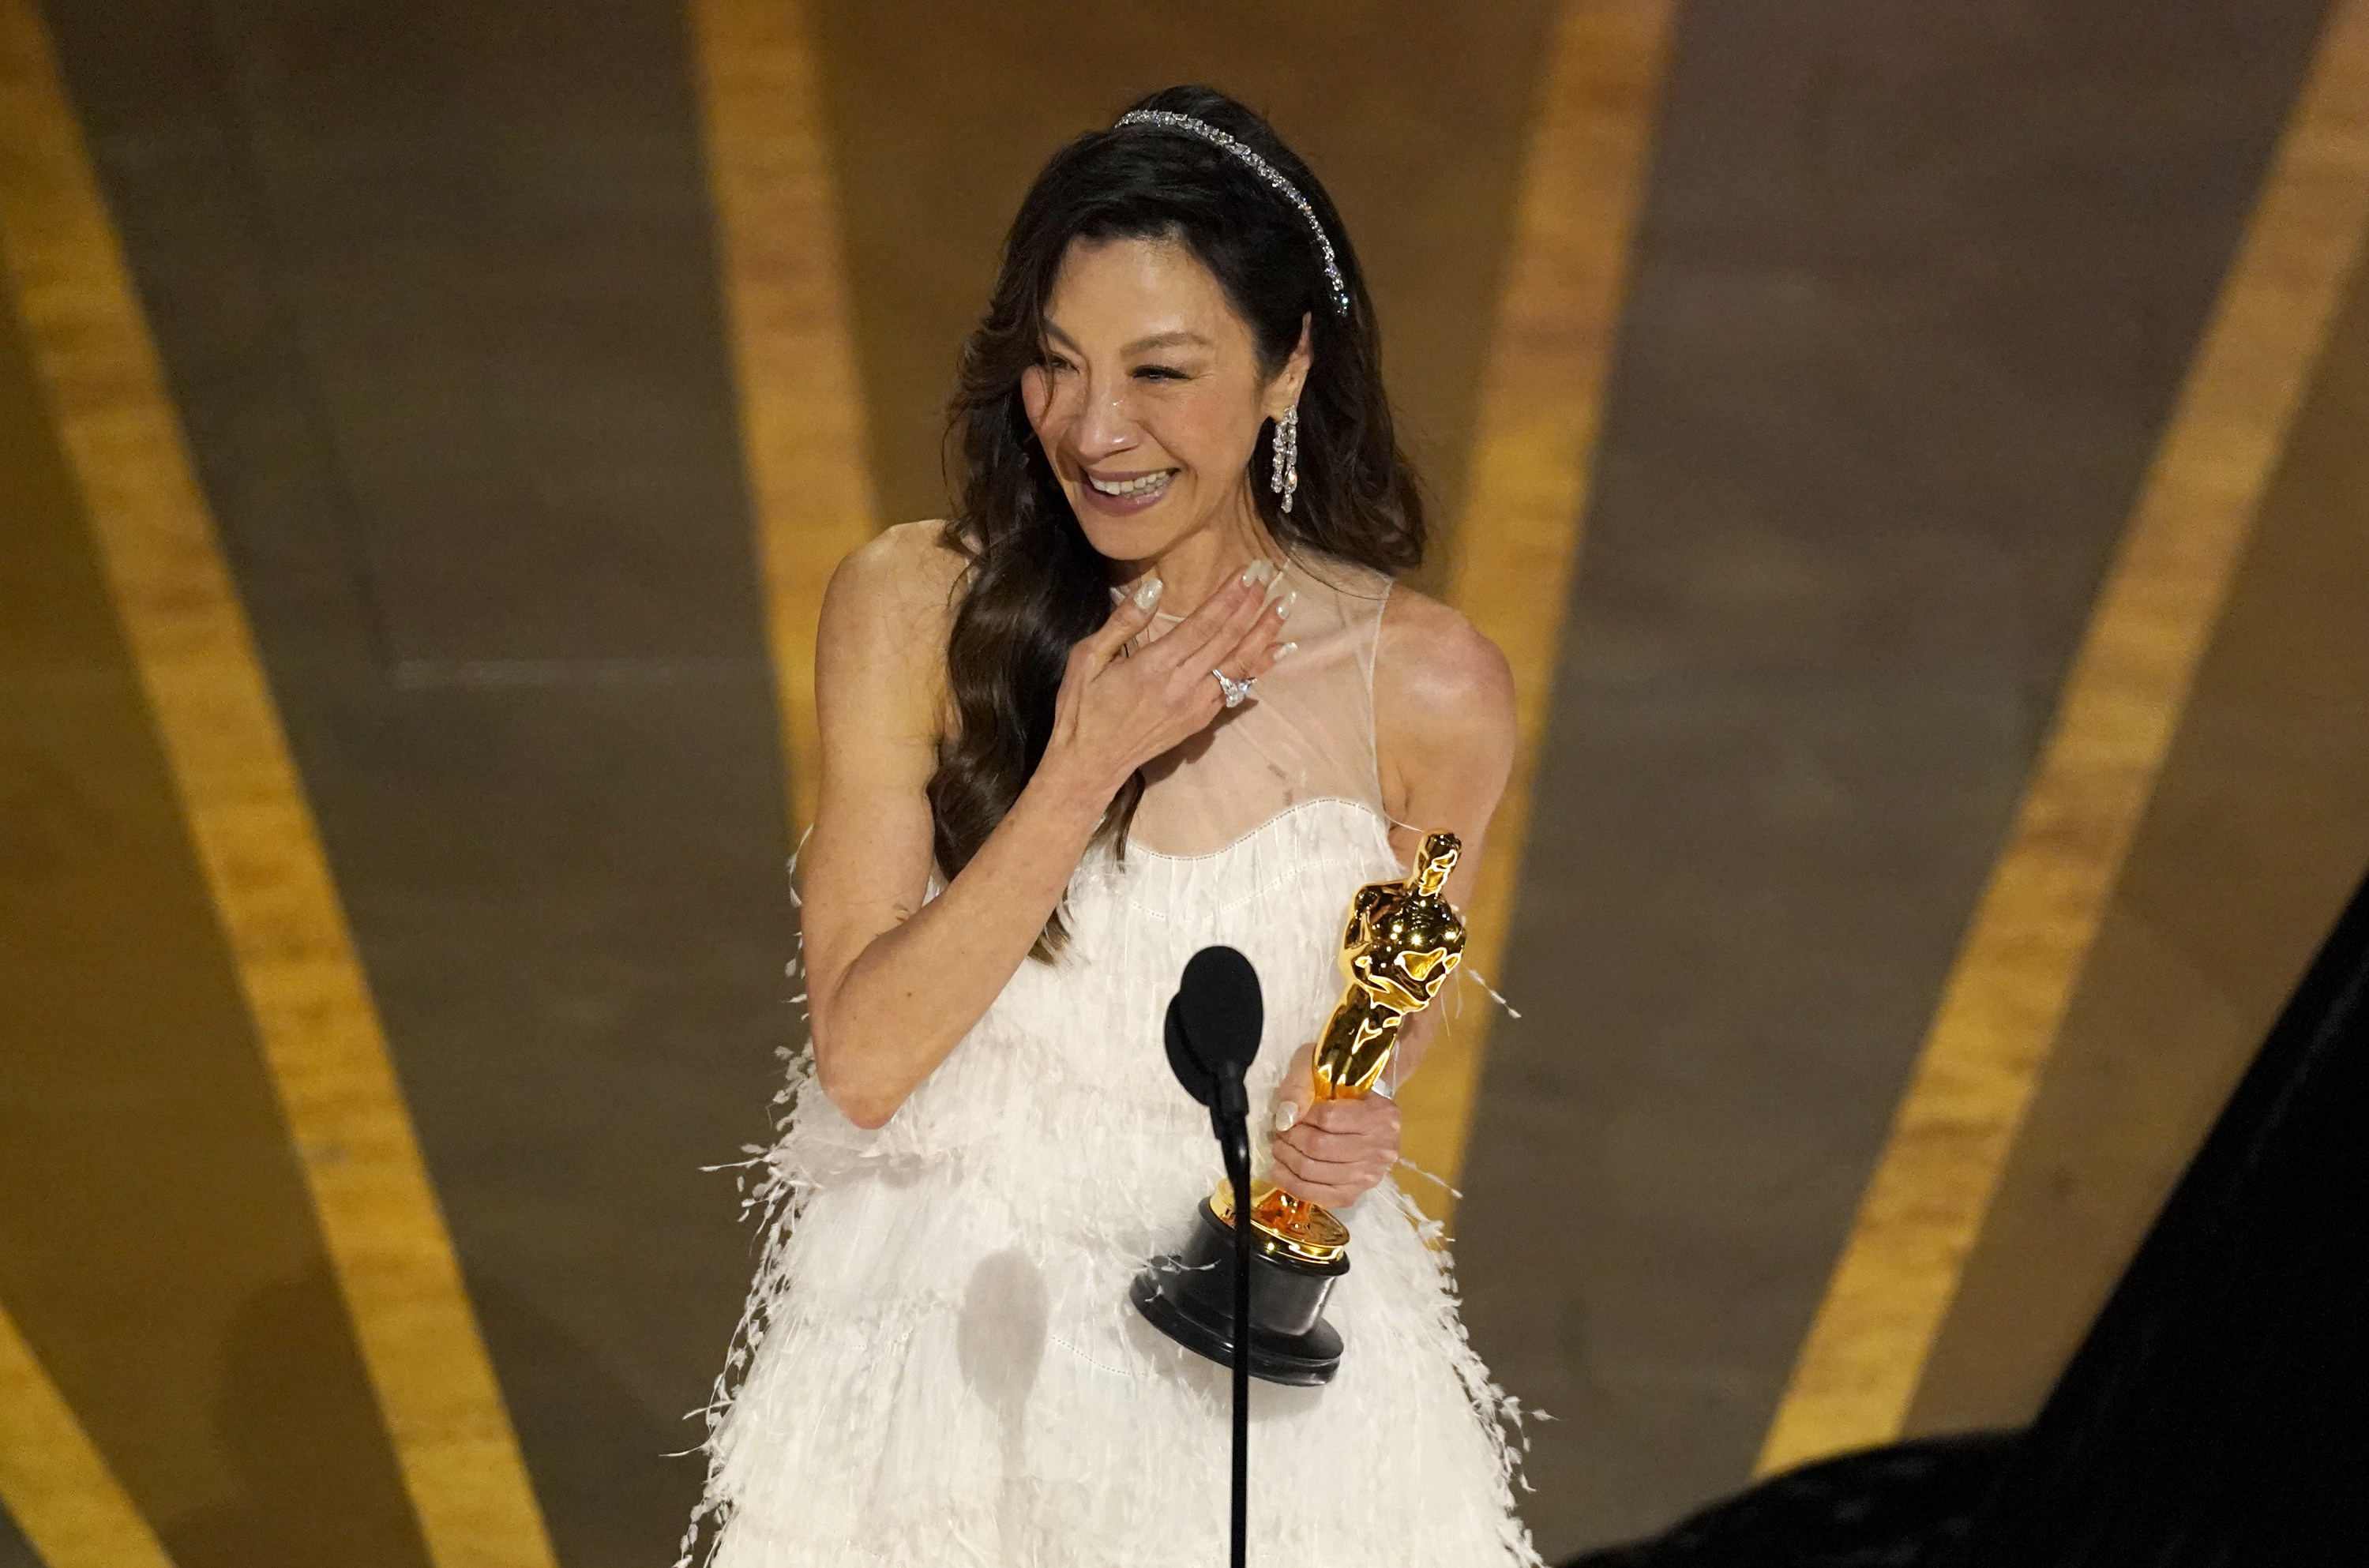 Michelle Yeoh accepts the award for best performance by an actress in a leading role for “Everything Everywhere All at Once” at the Oscars on March 12, 2023. Photo: AP